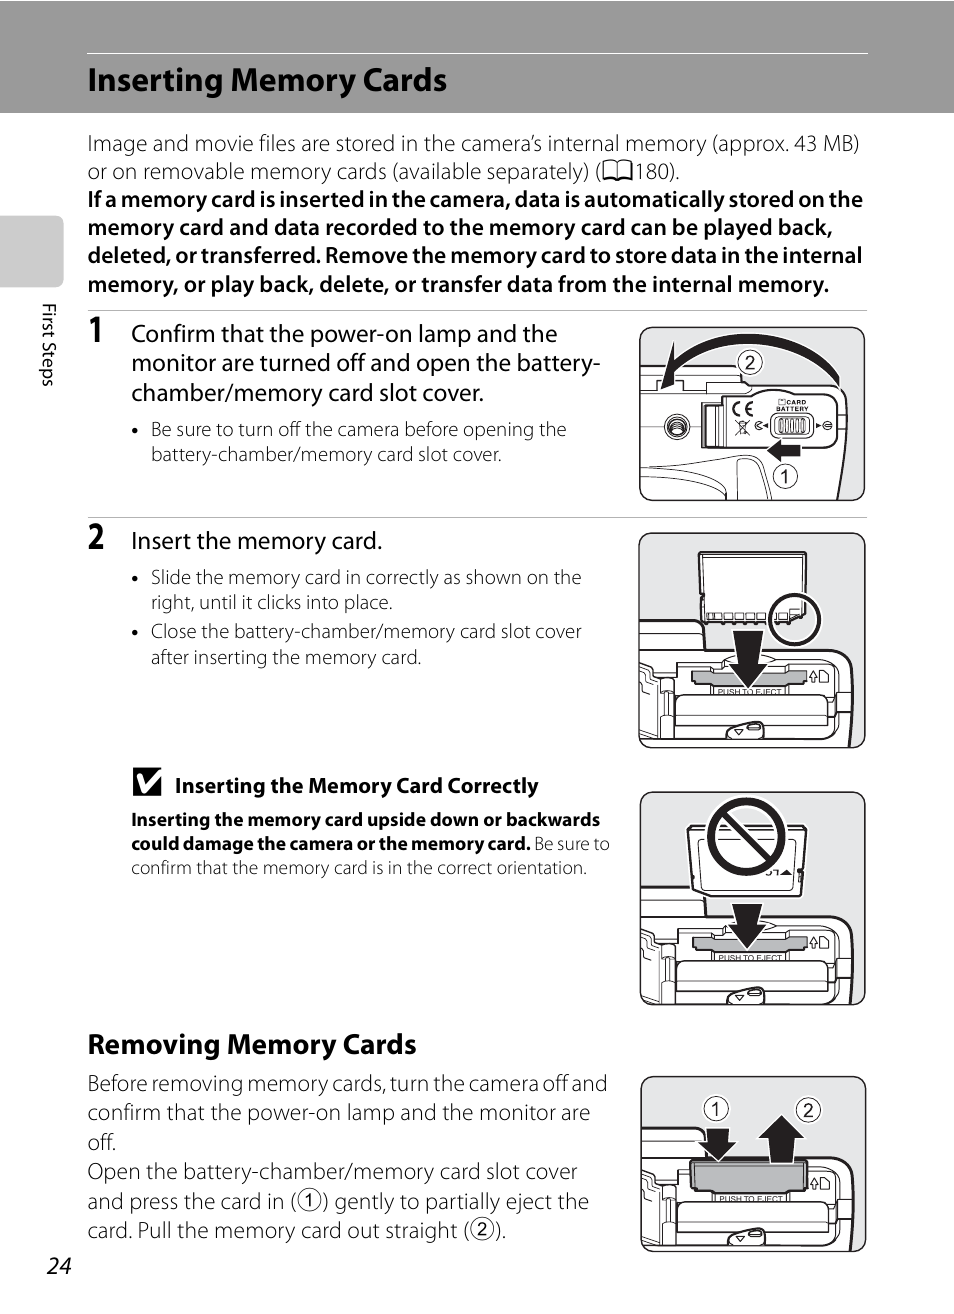 Inserting memory cards, Removing memory cards | Nikon COOLPIX-P100 User Manual | Page 36 / 216